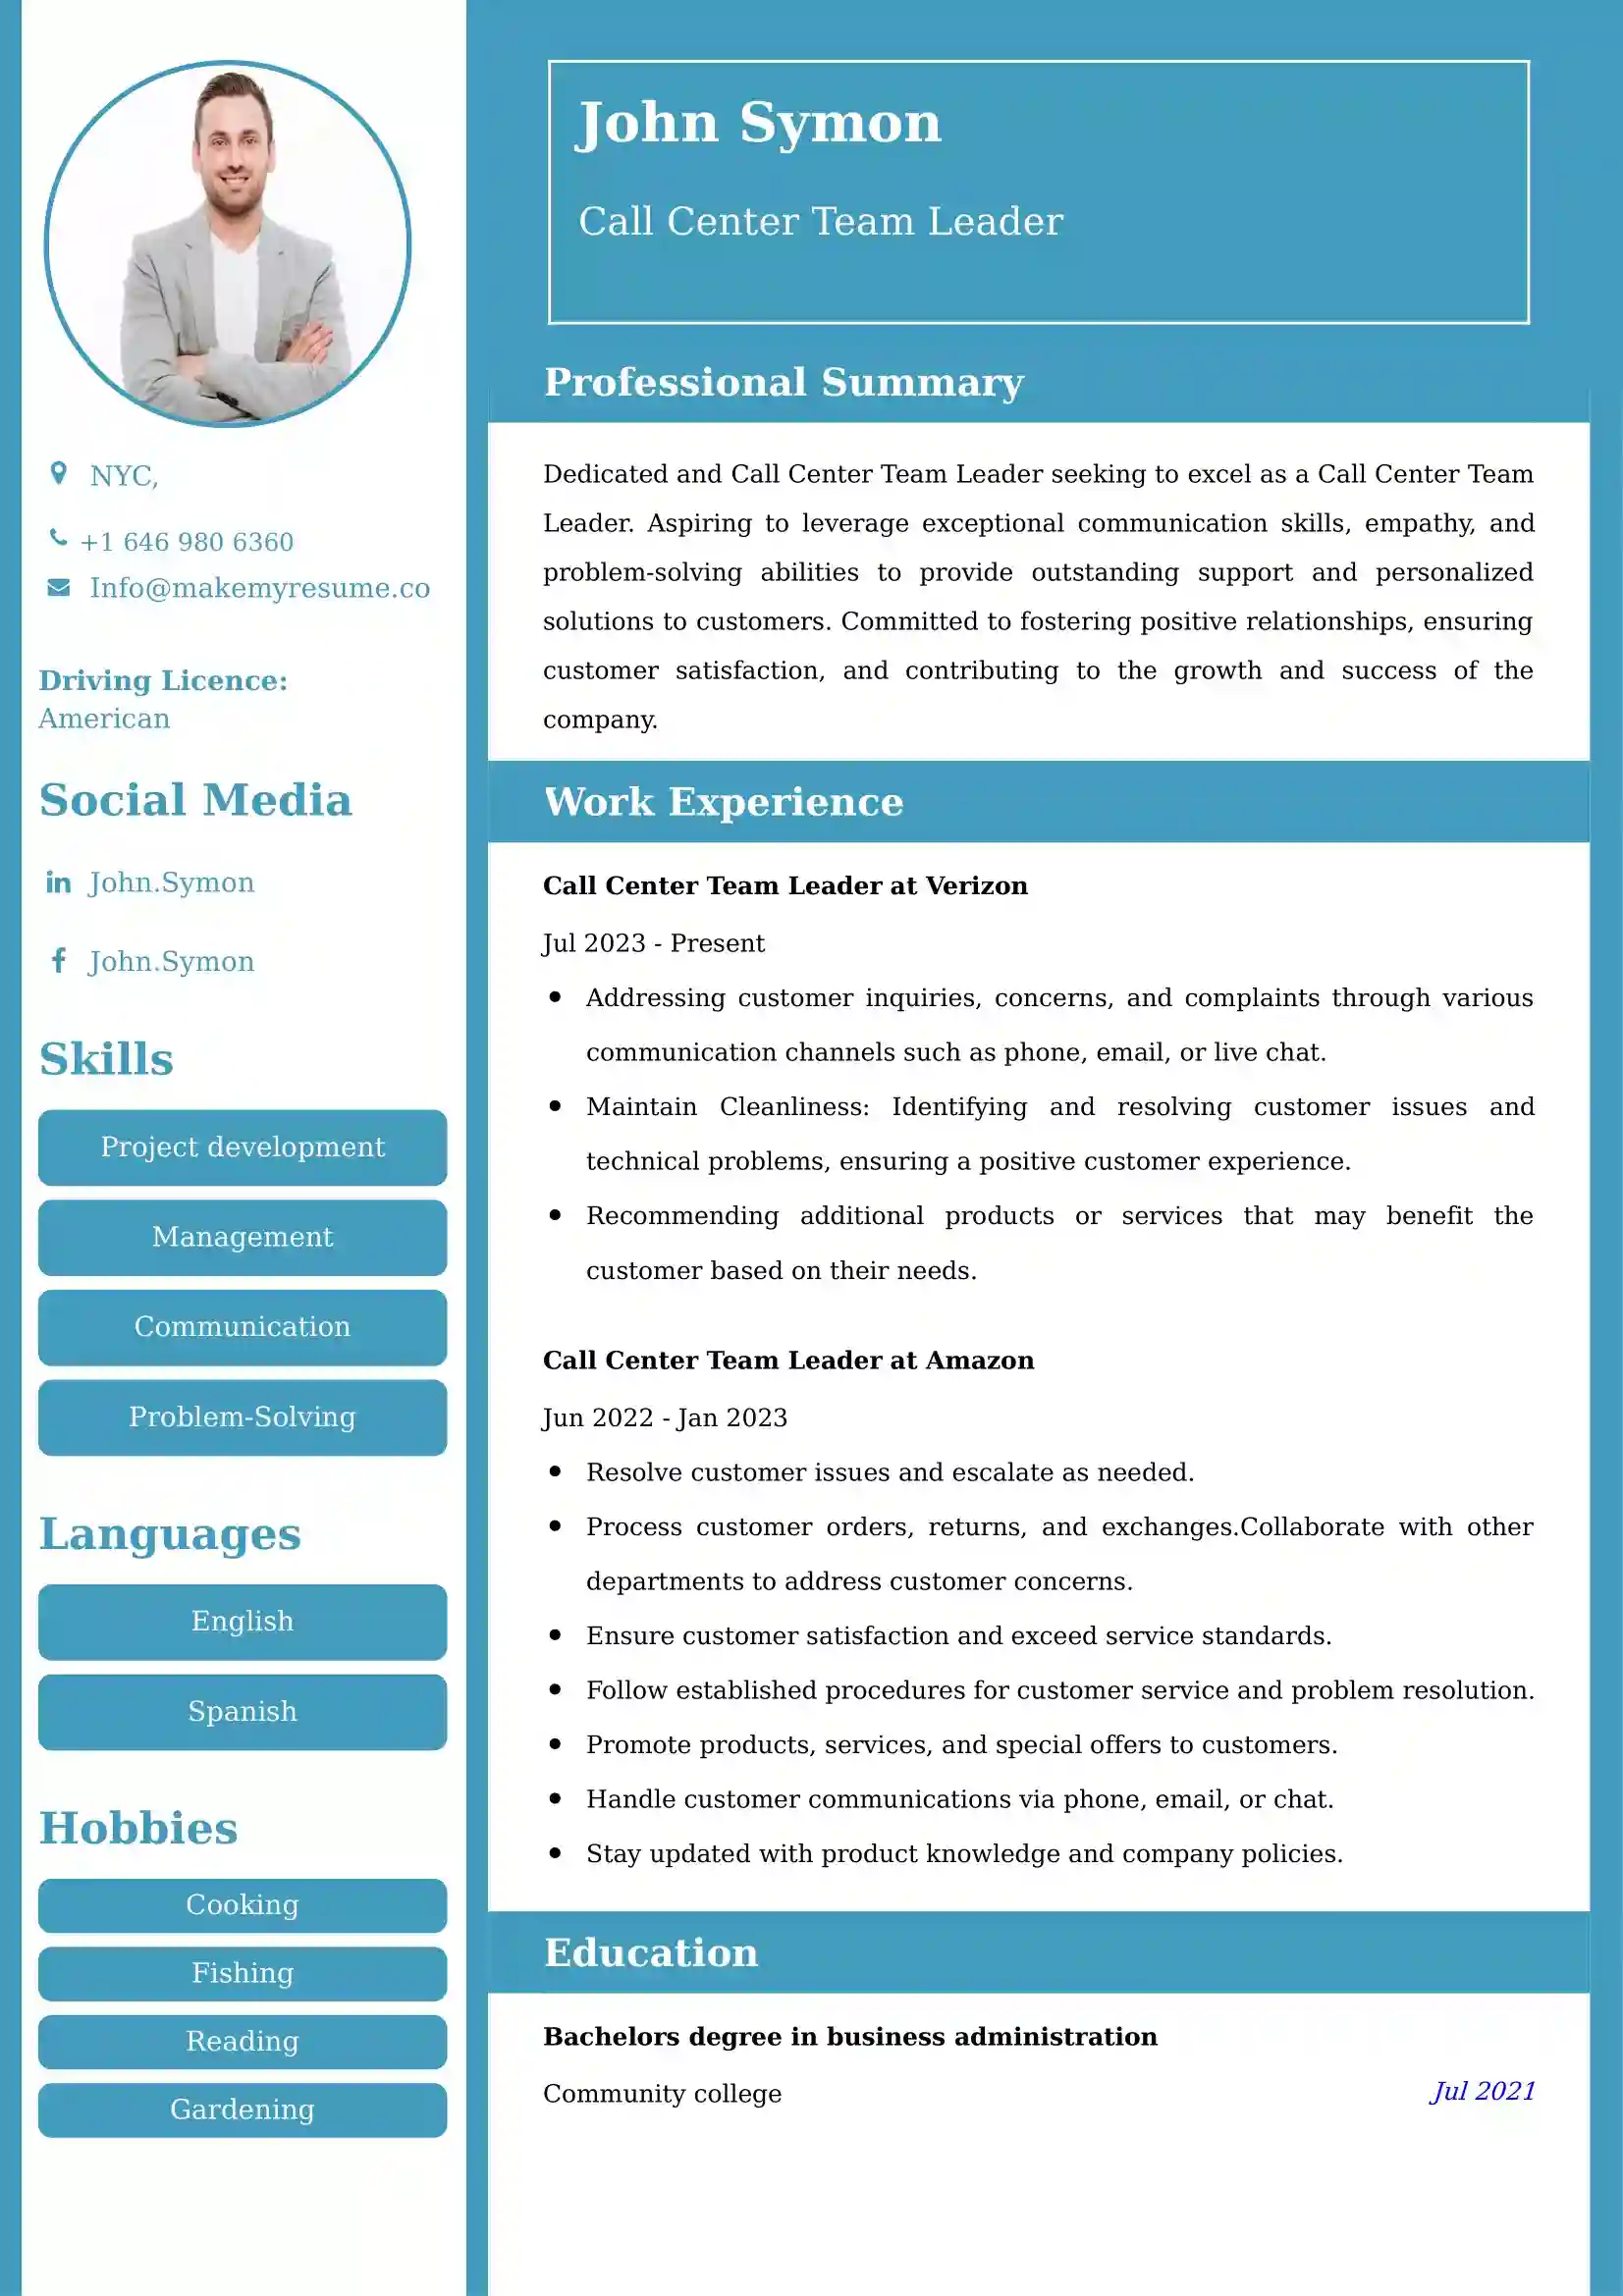 Call Center Team Leader Resume Examples for UK Jobs - Tips and Guide